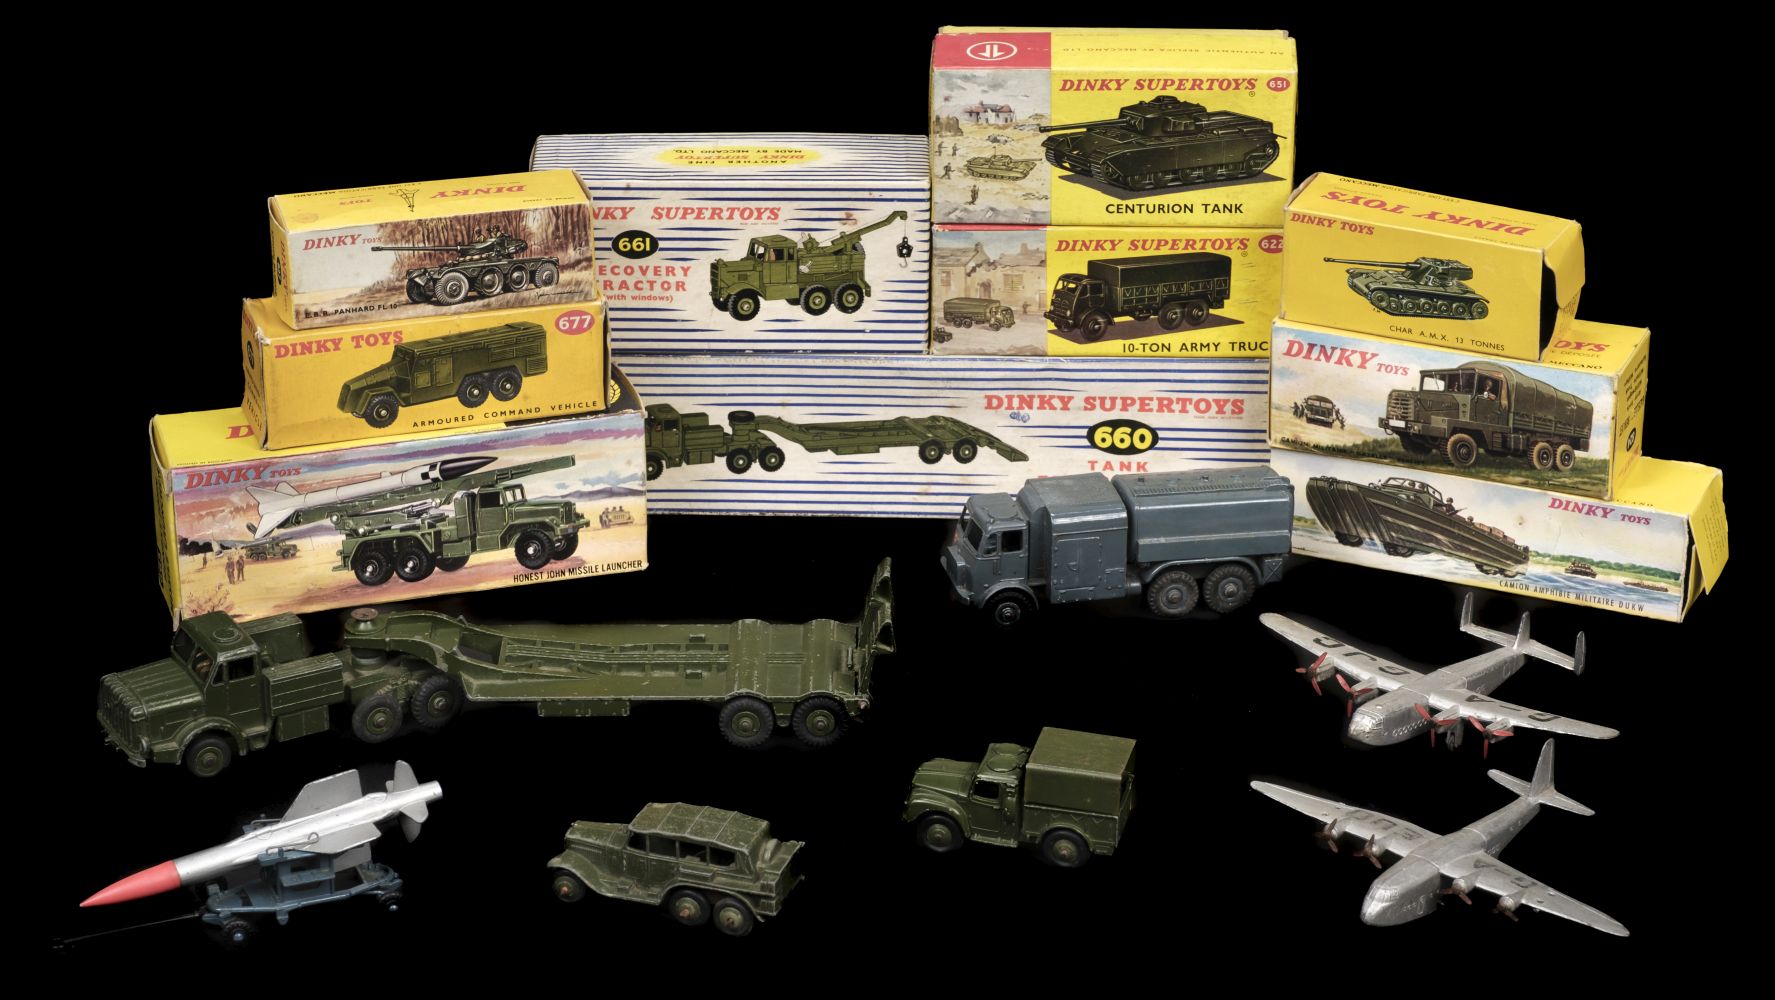 Dinky Toys. A collection of post-war die-cast metal toy vehicles, mid-late 20th-century